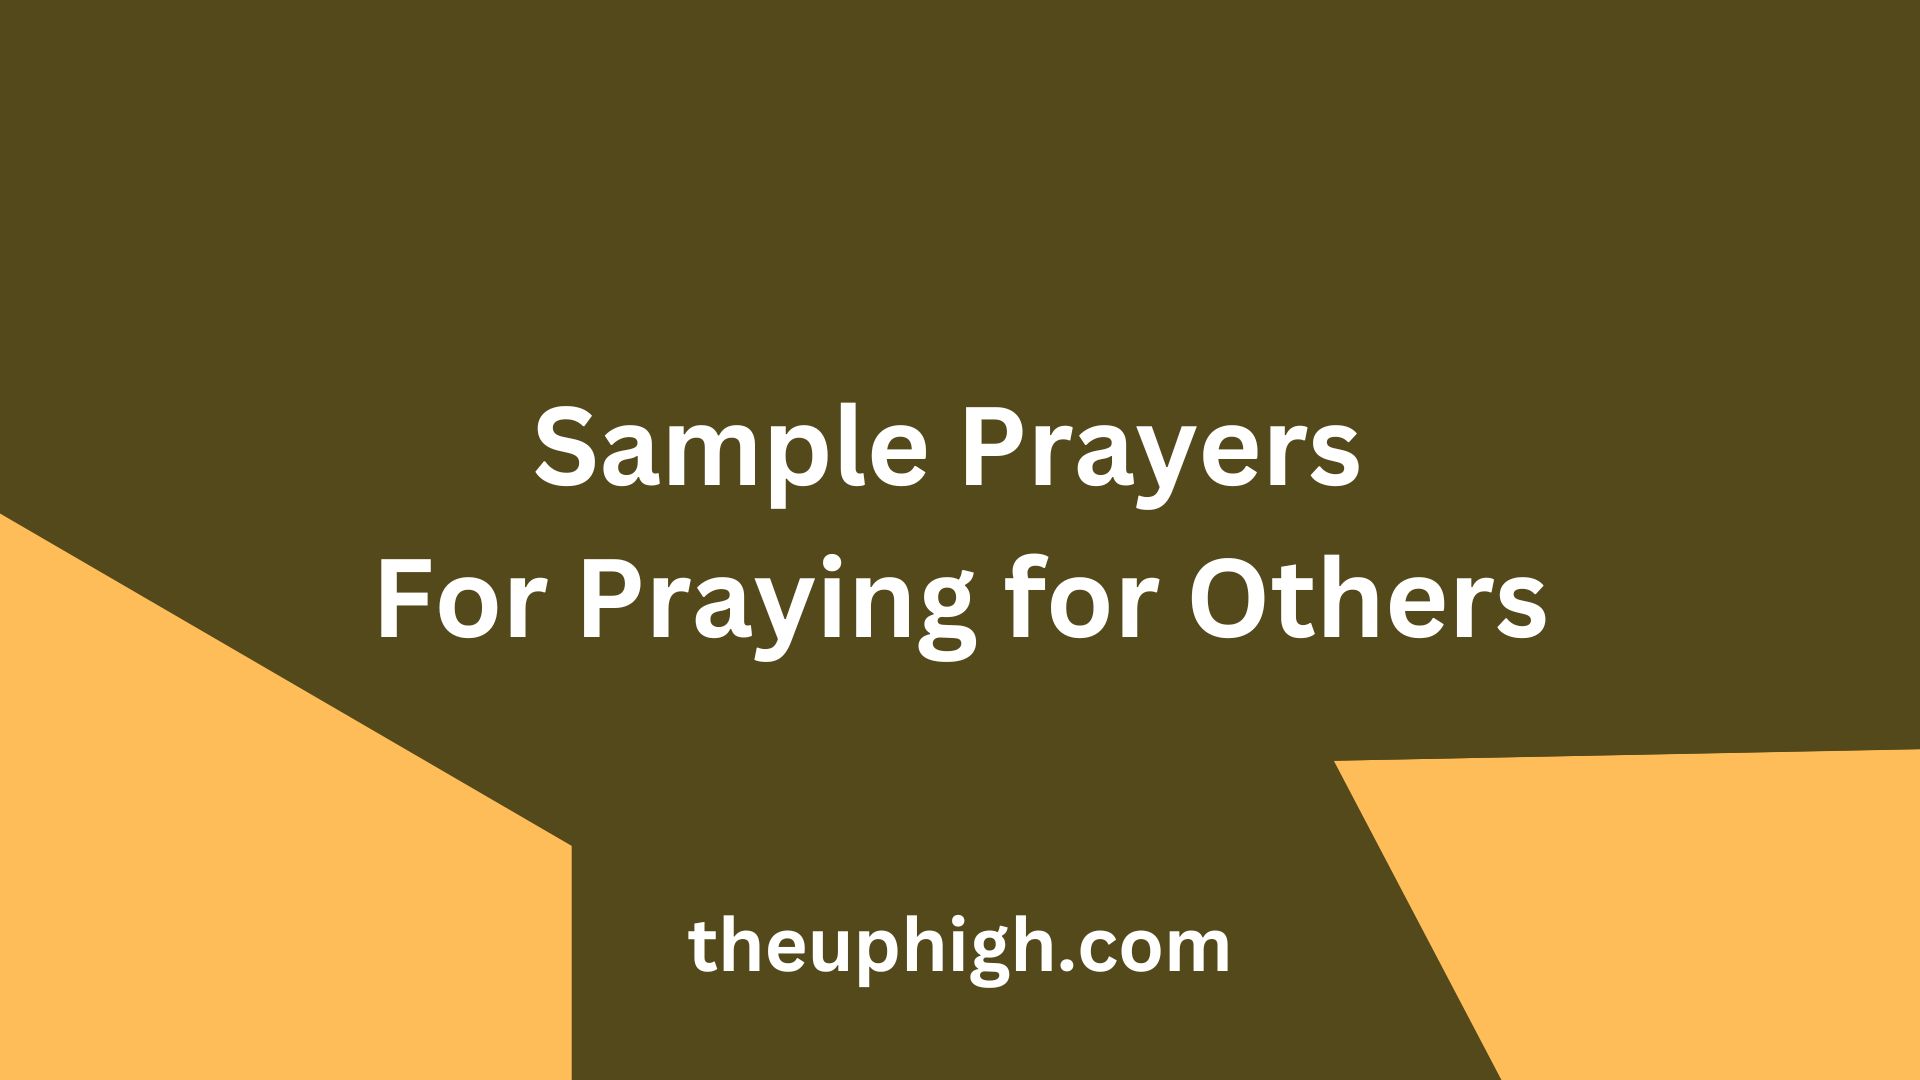 Sample Prayers For Praying for Others